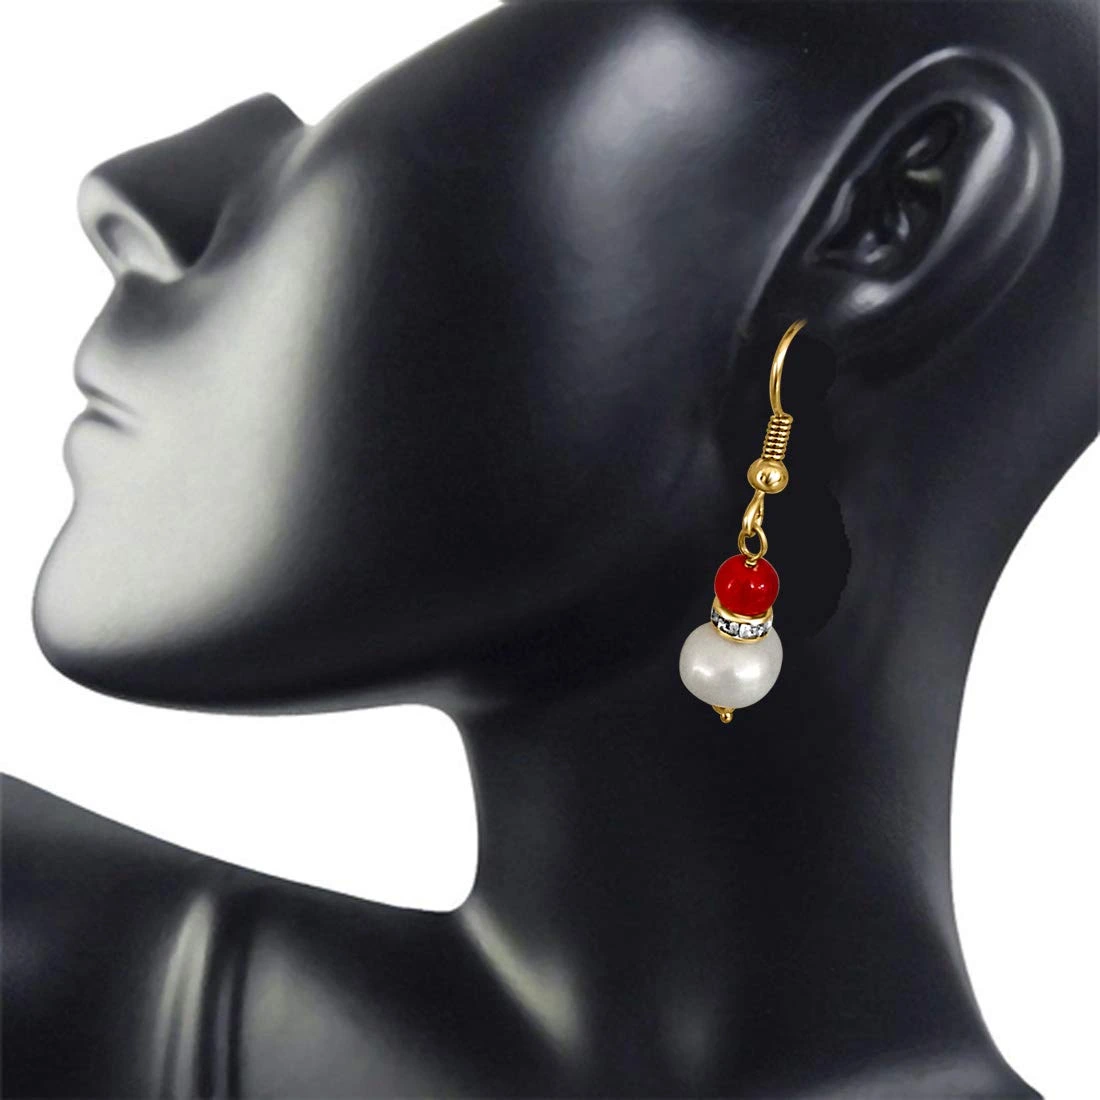 Real Big Pearl & Red Stone Earrings for Women (SE210)